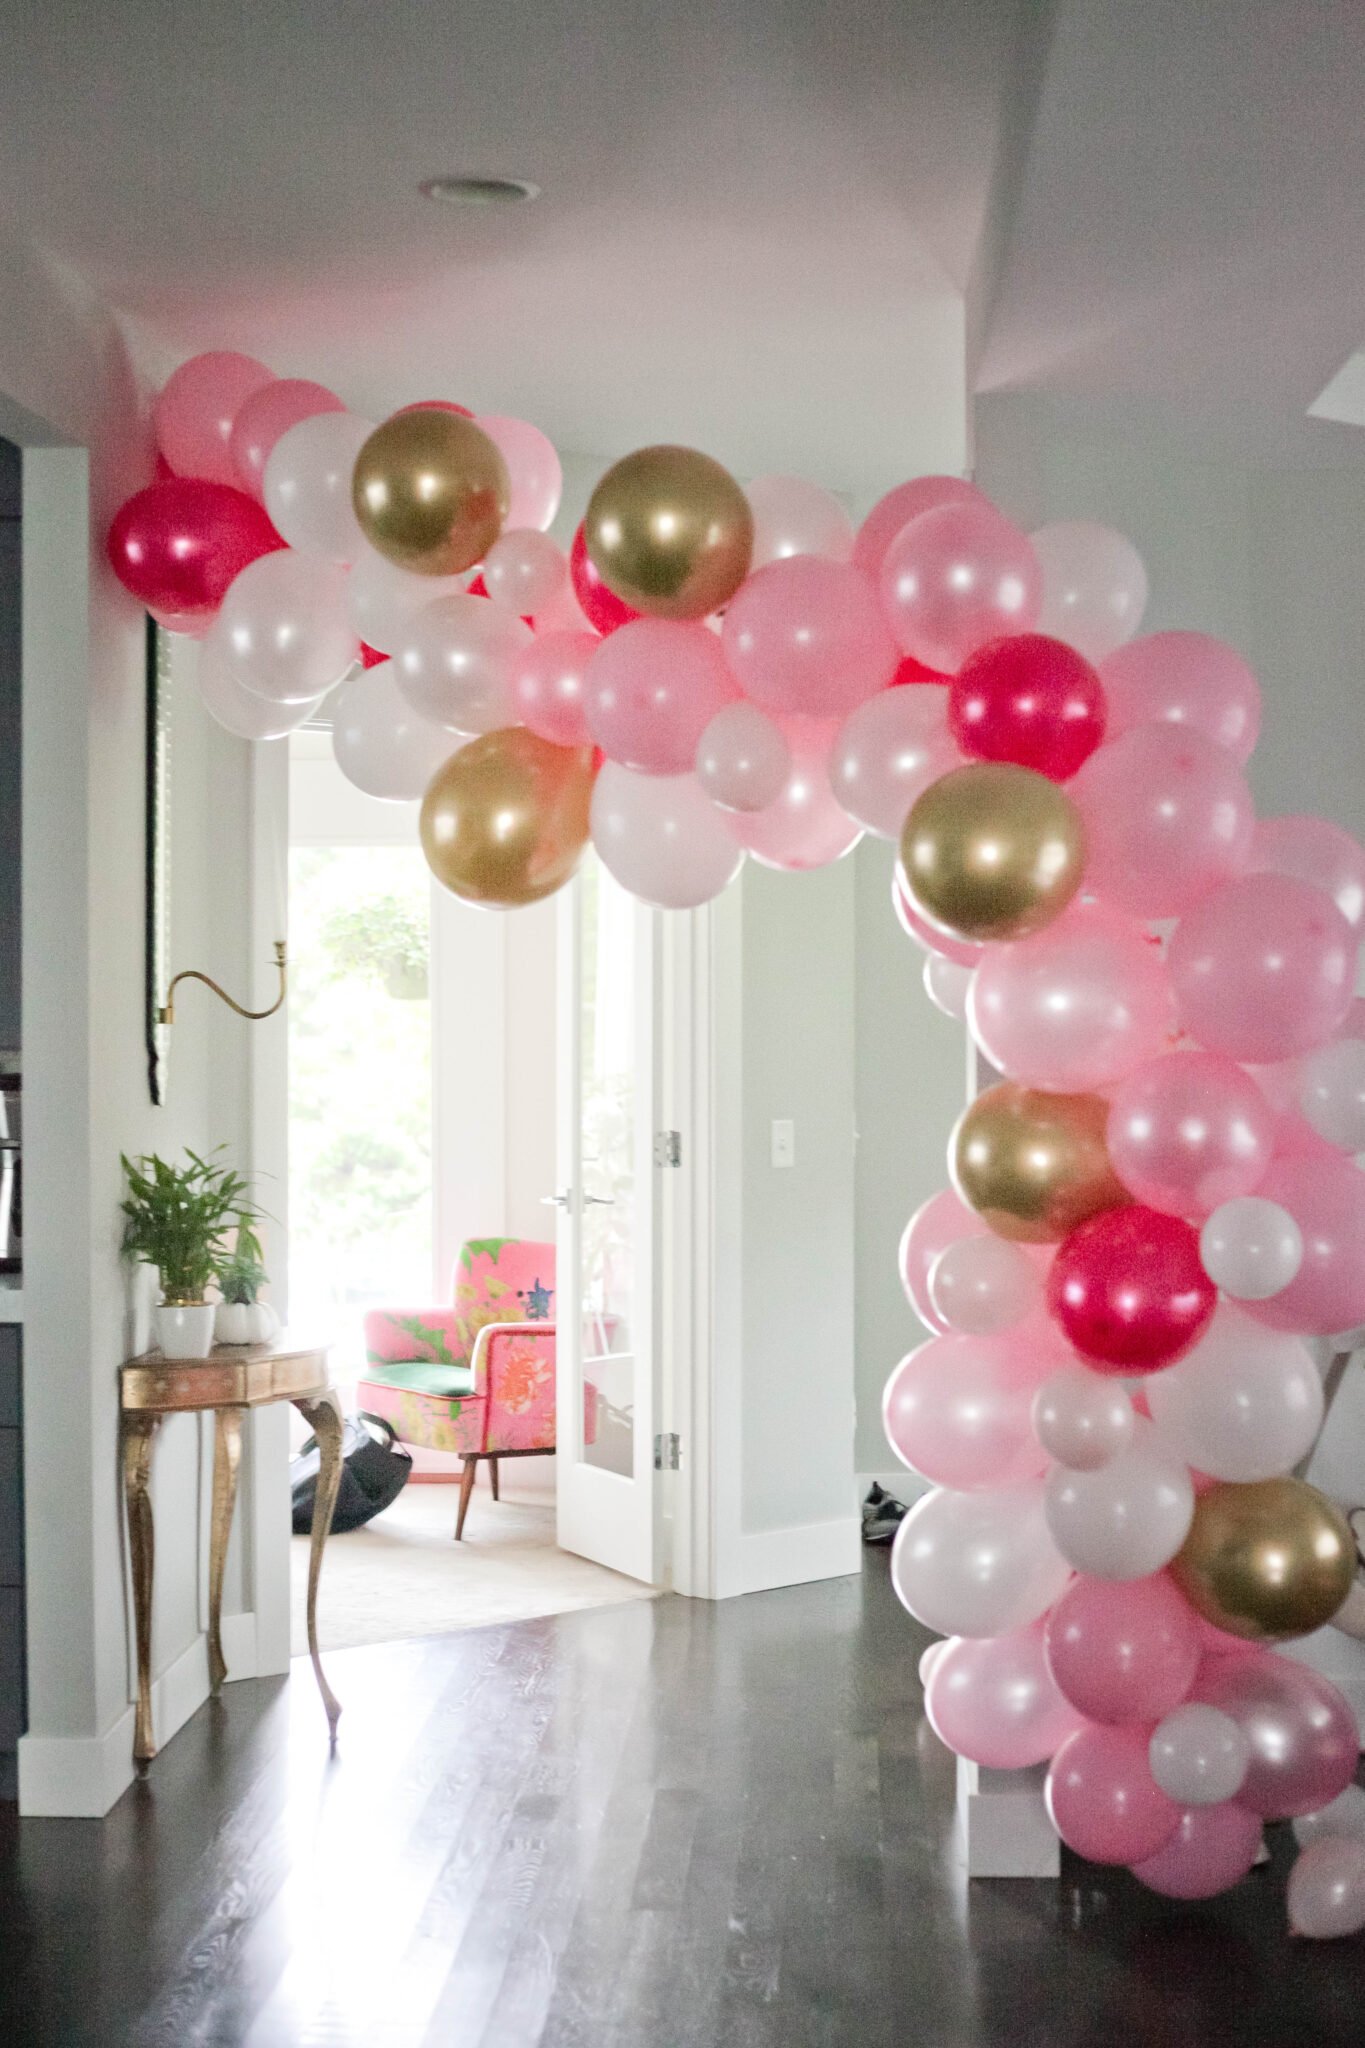 A pink, white and gold balloon arch for a Minnie Mouse birthday for a 2 year old.